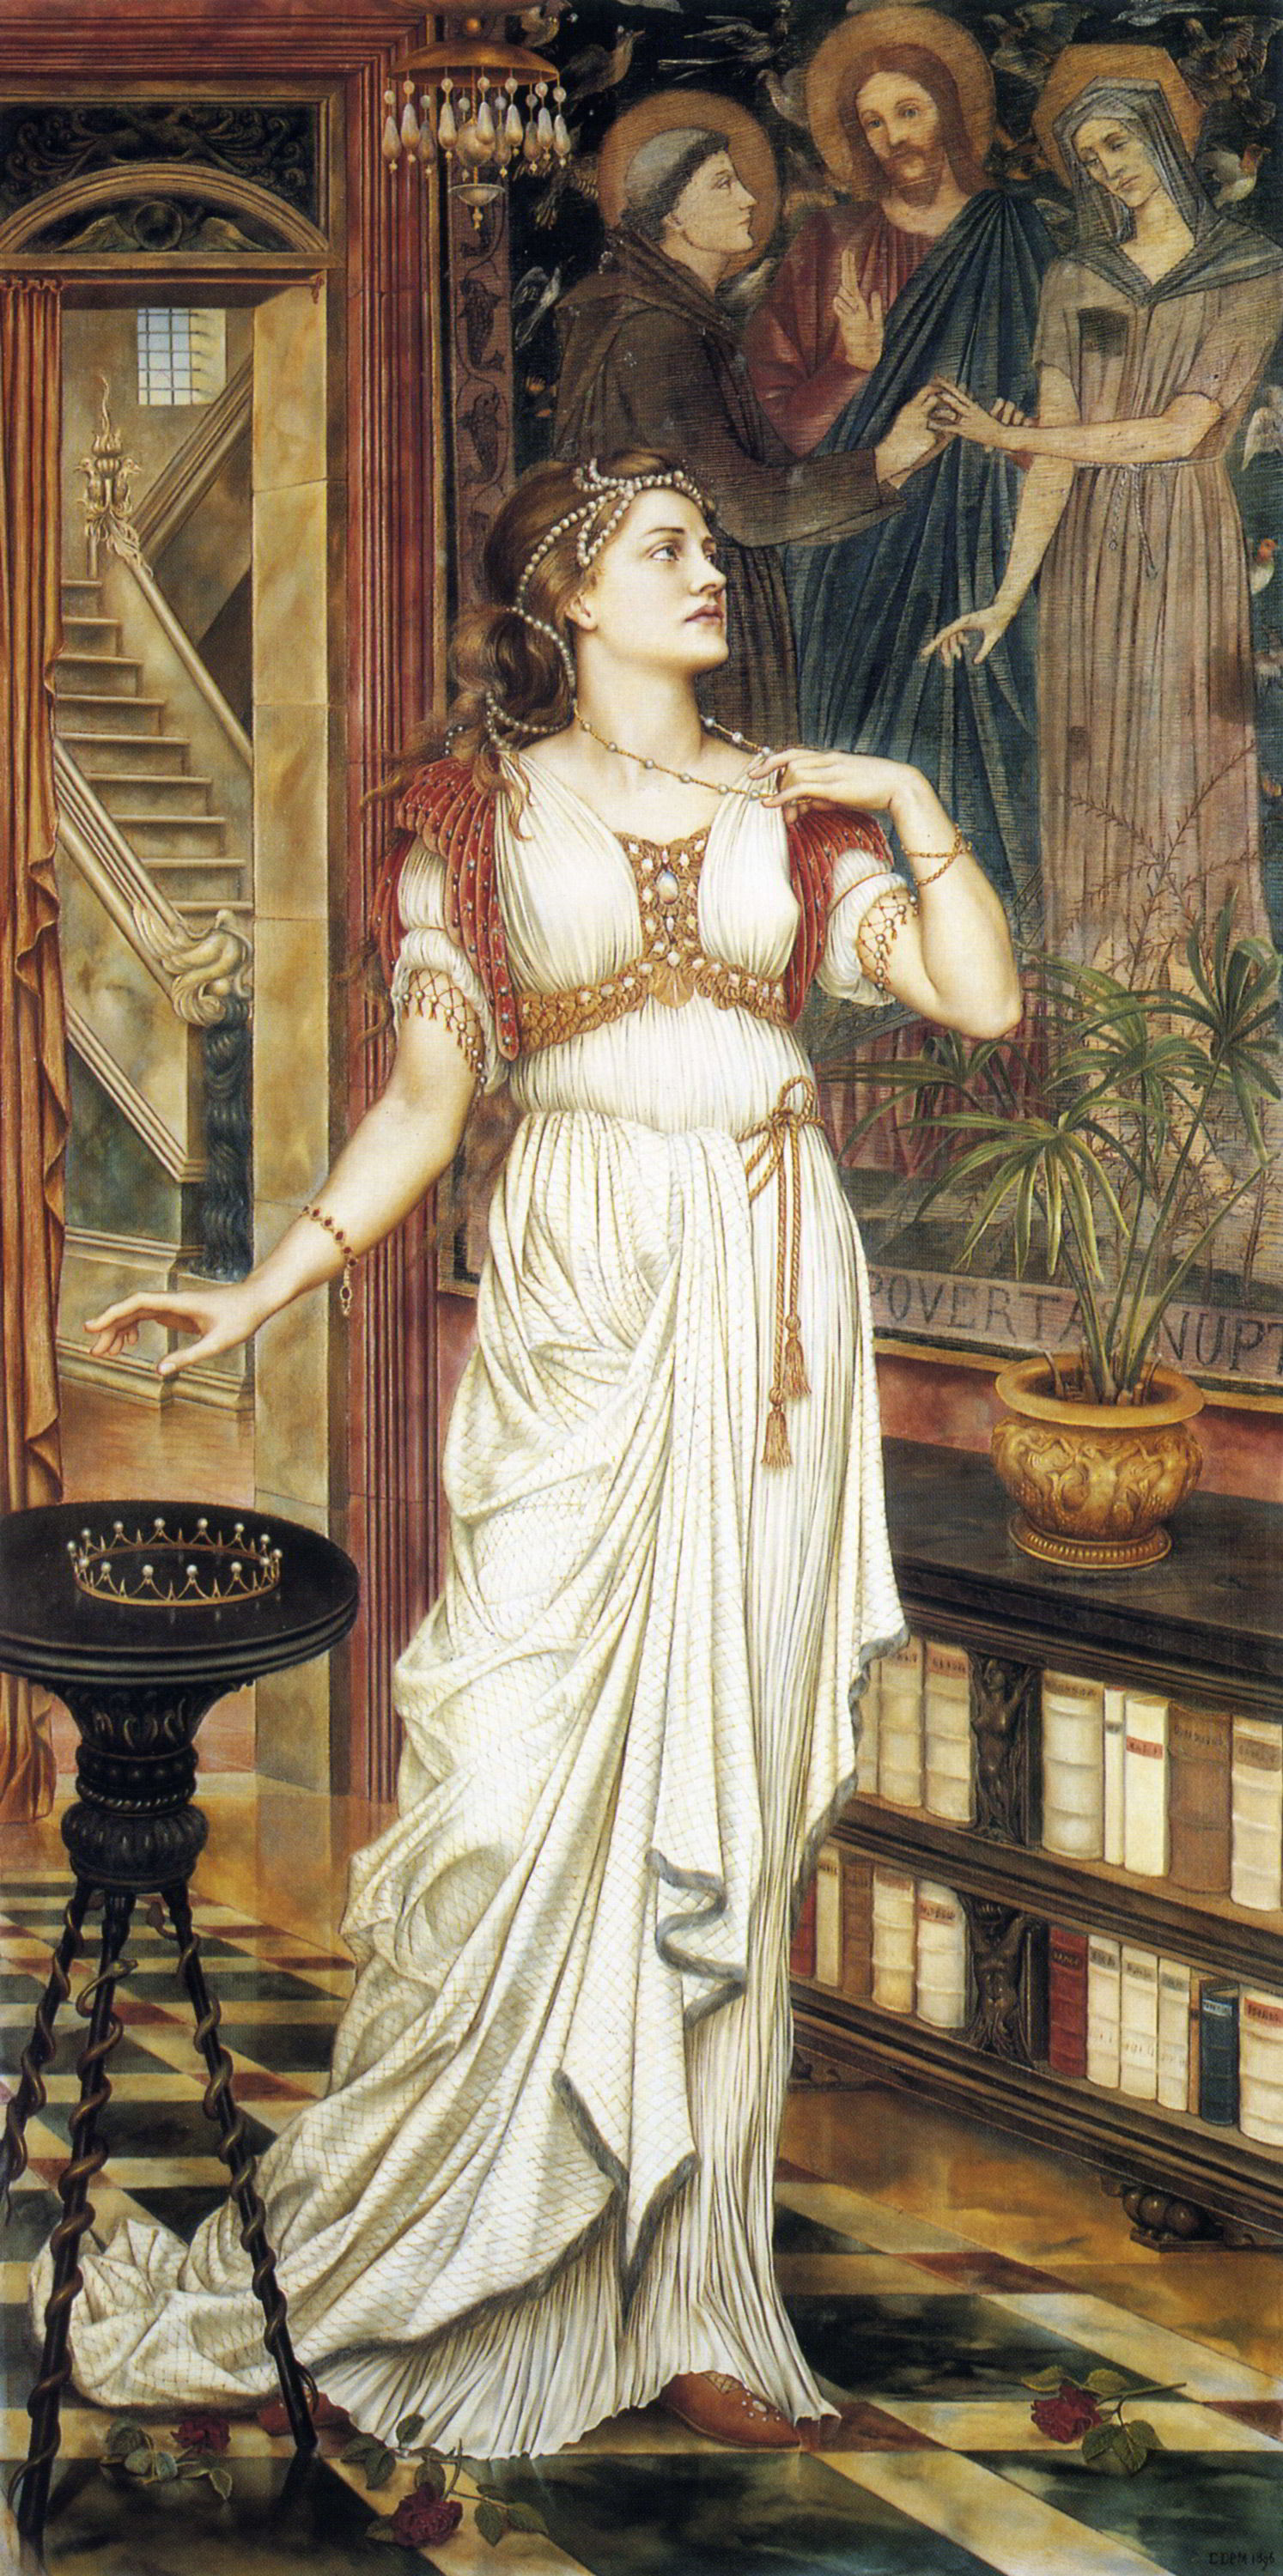 The Crown of Glory by Evelyn de Morgan